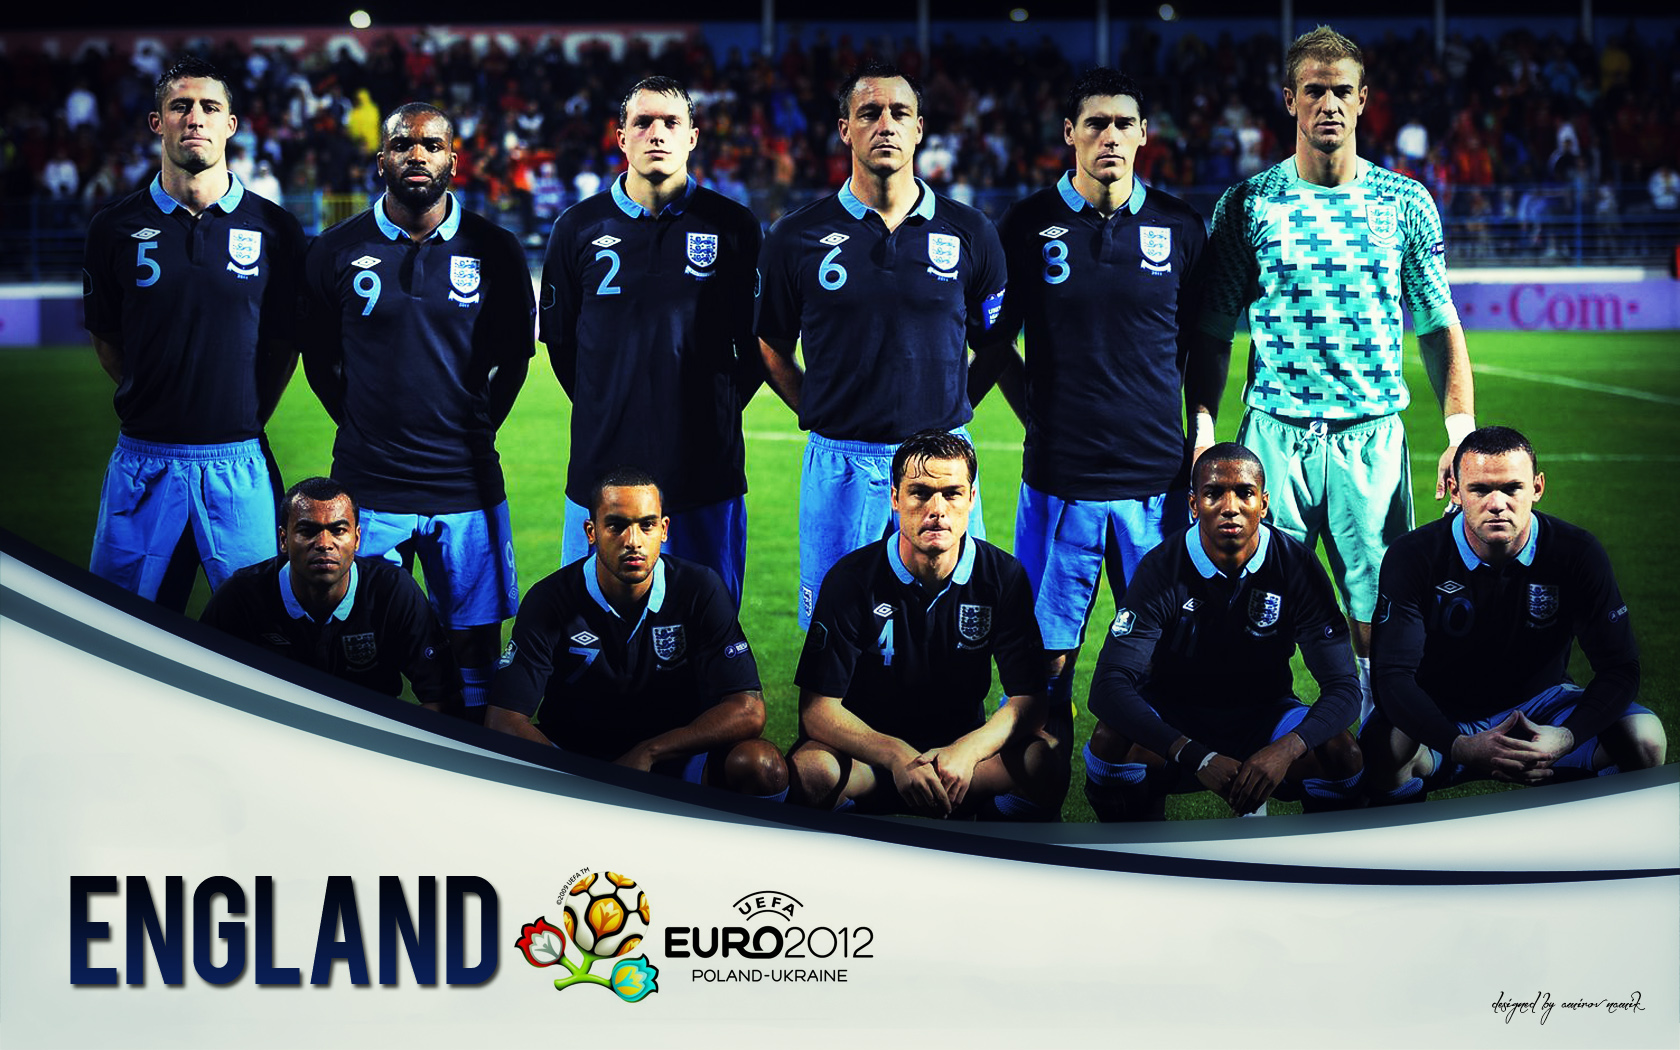 England National Football Team Picture by Namik Amirov